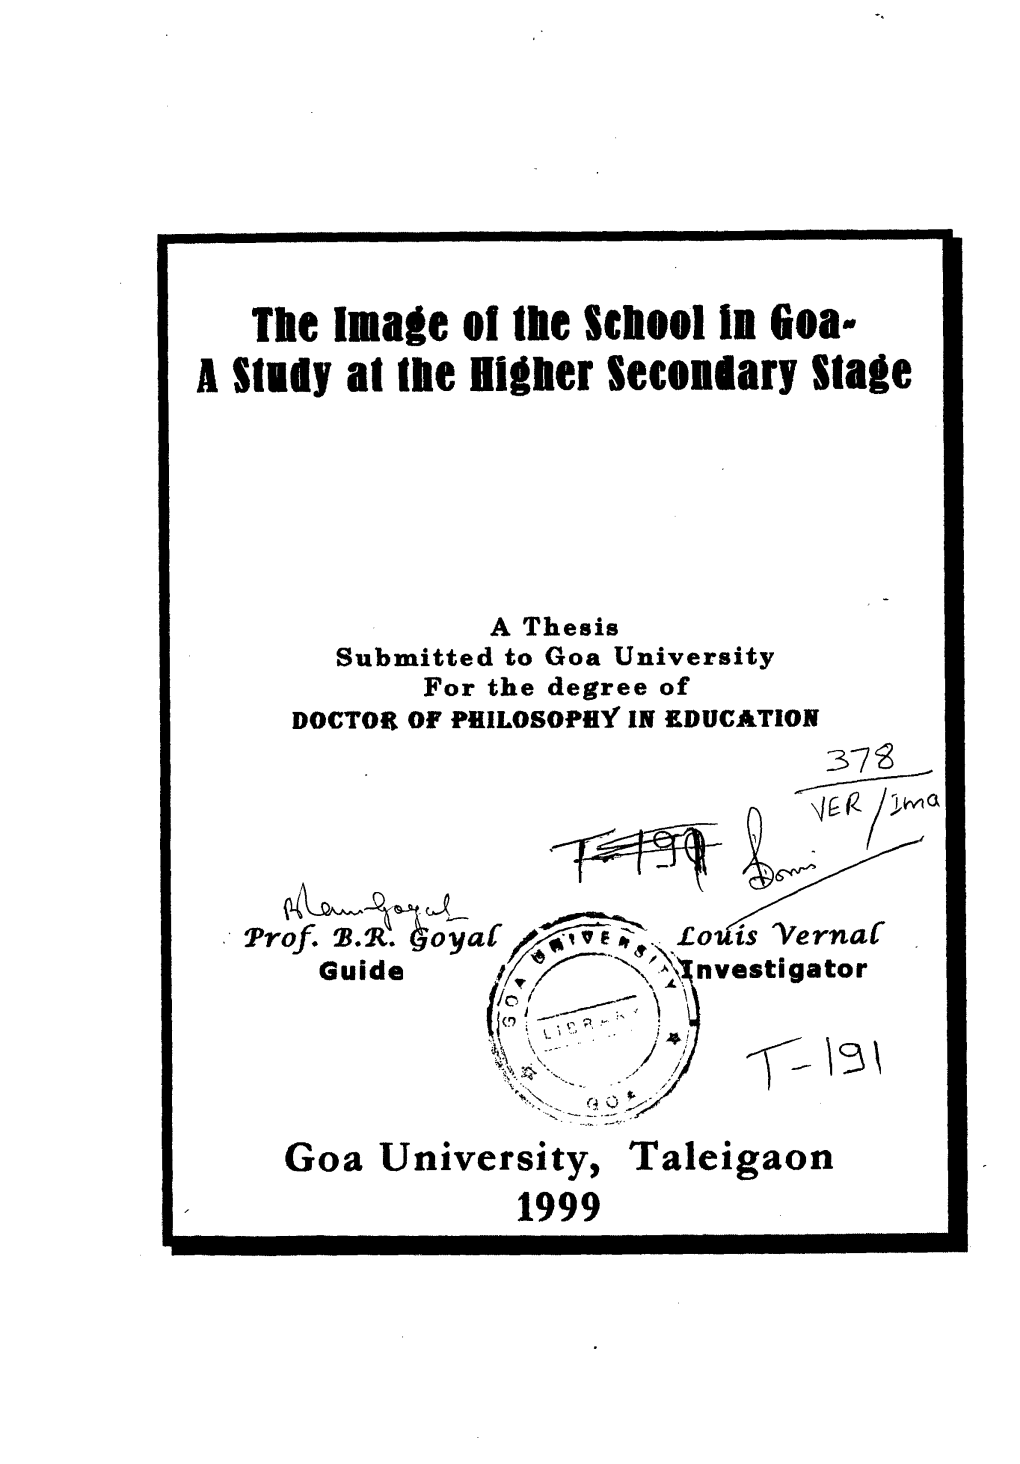 The Image Al the School in Goa- I Silly Al Ike Higher Secondary Stage